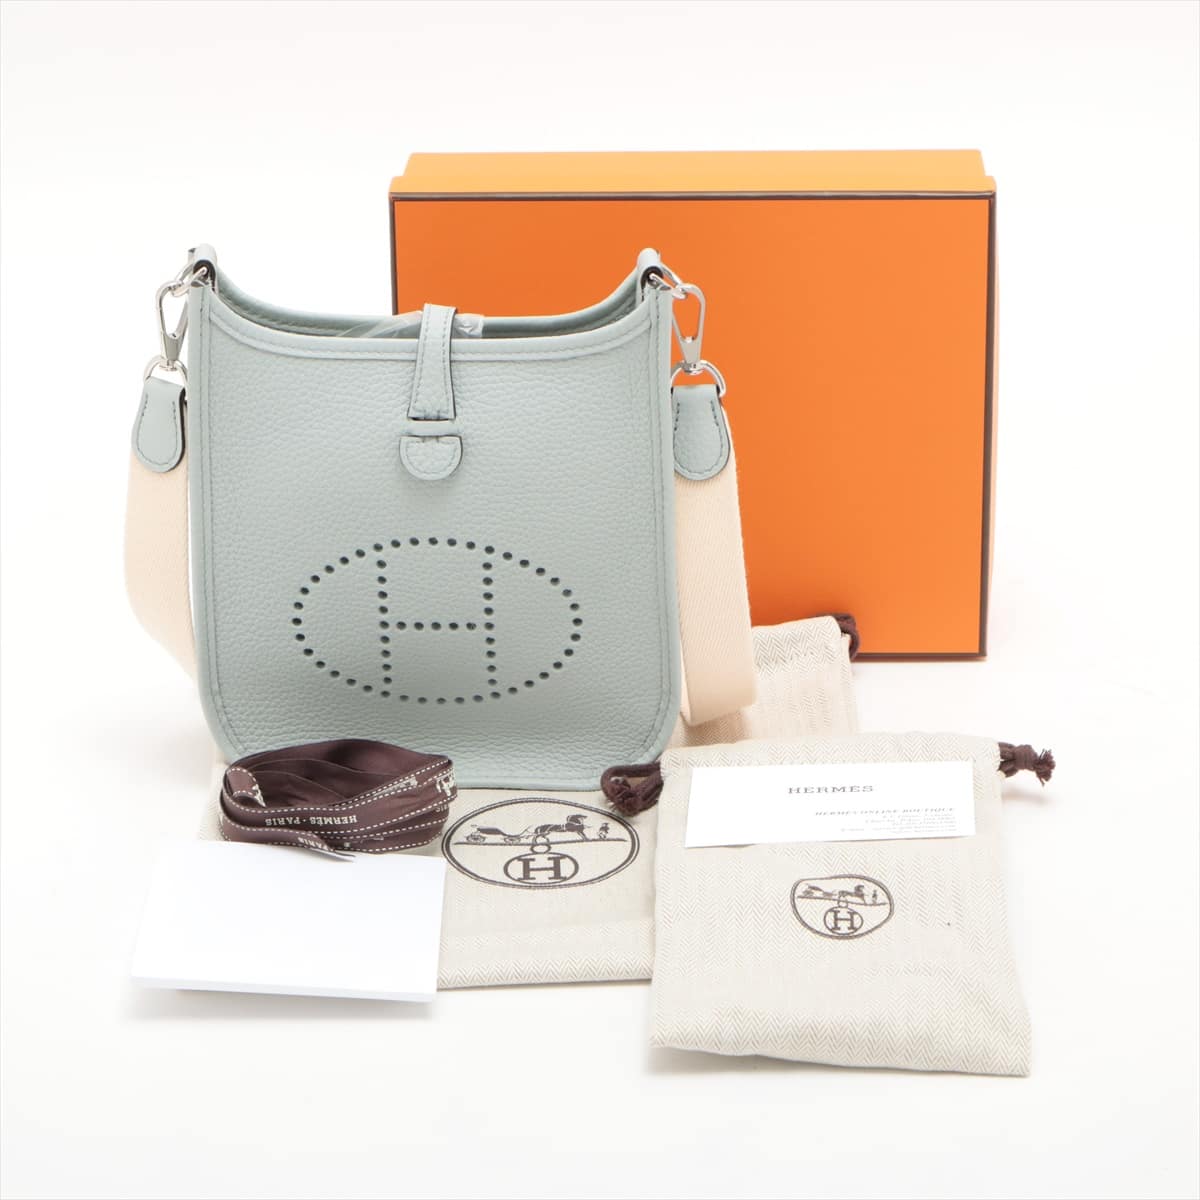 sold out. エルメス　Hermes エブリン tpm 新品正規品